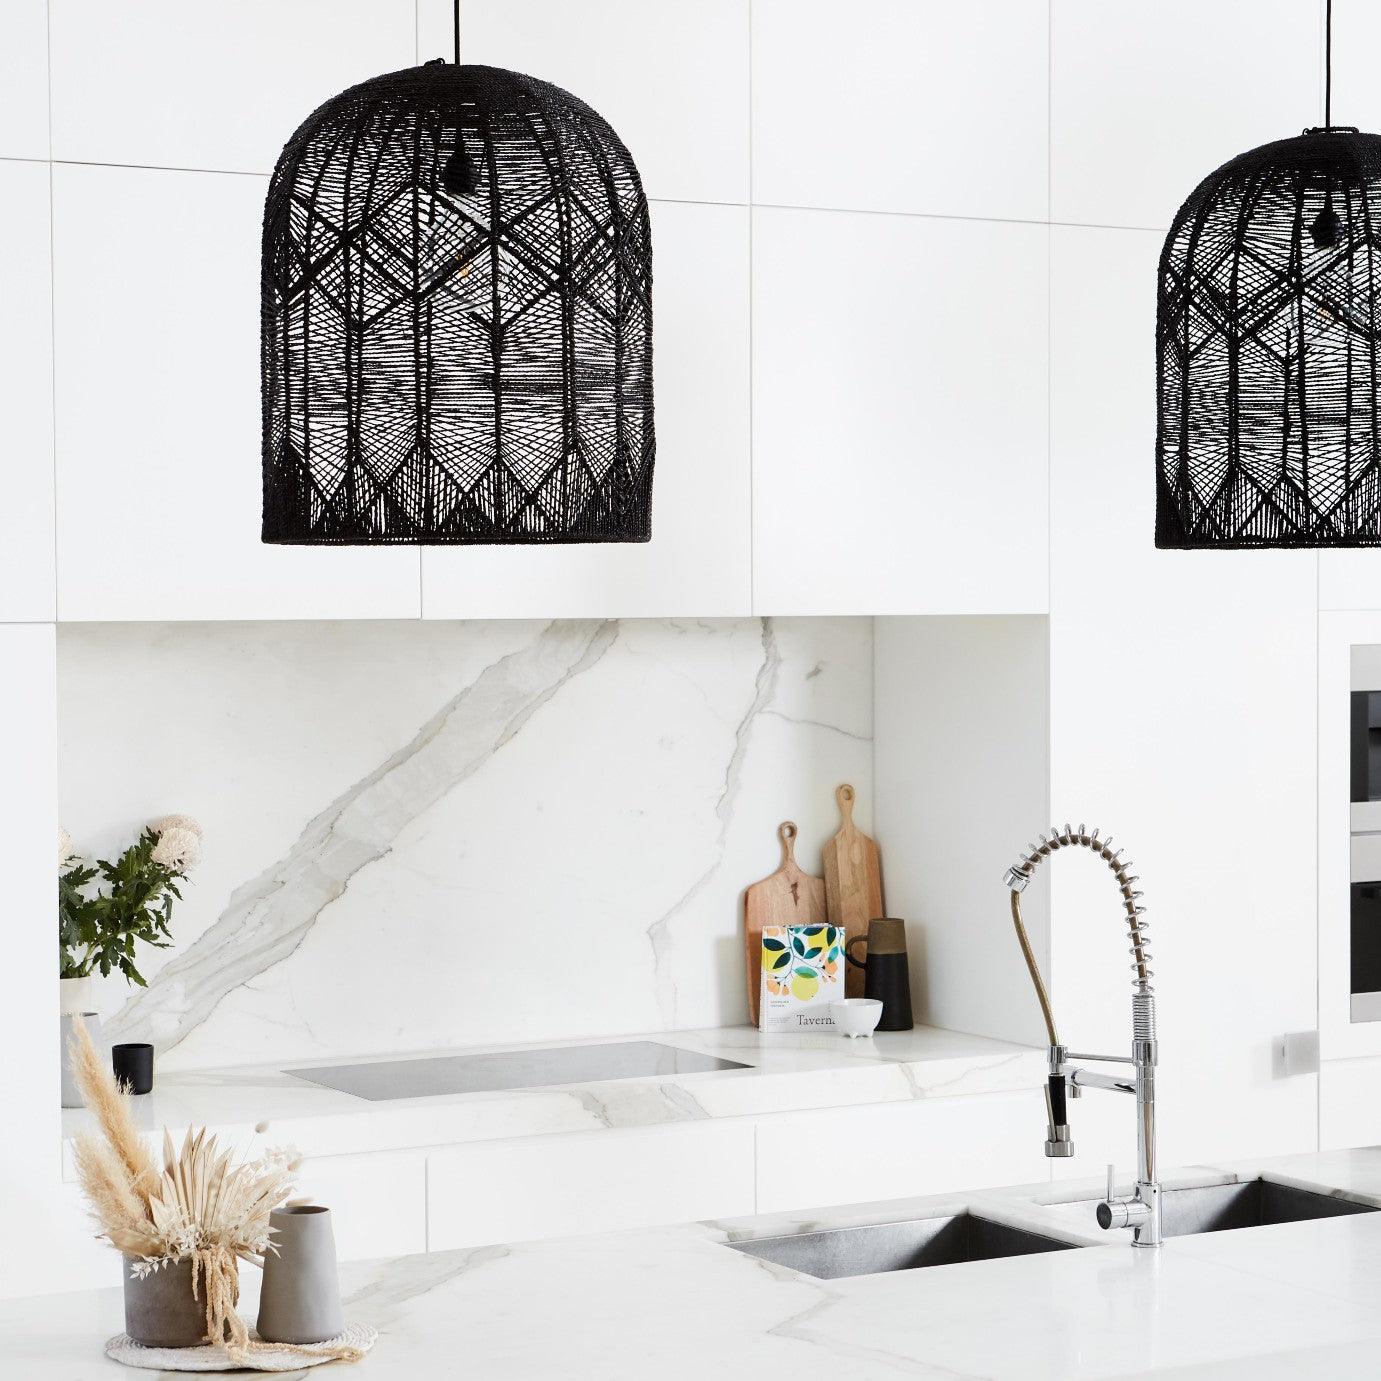 two large seagrass pendant light shades are hung over a luxurious white marble kitchen bench